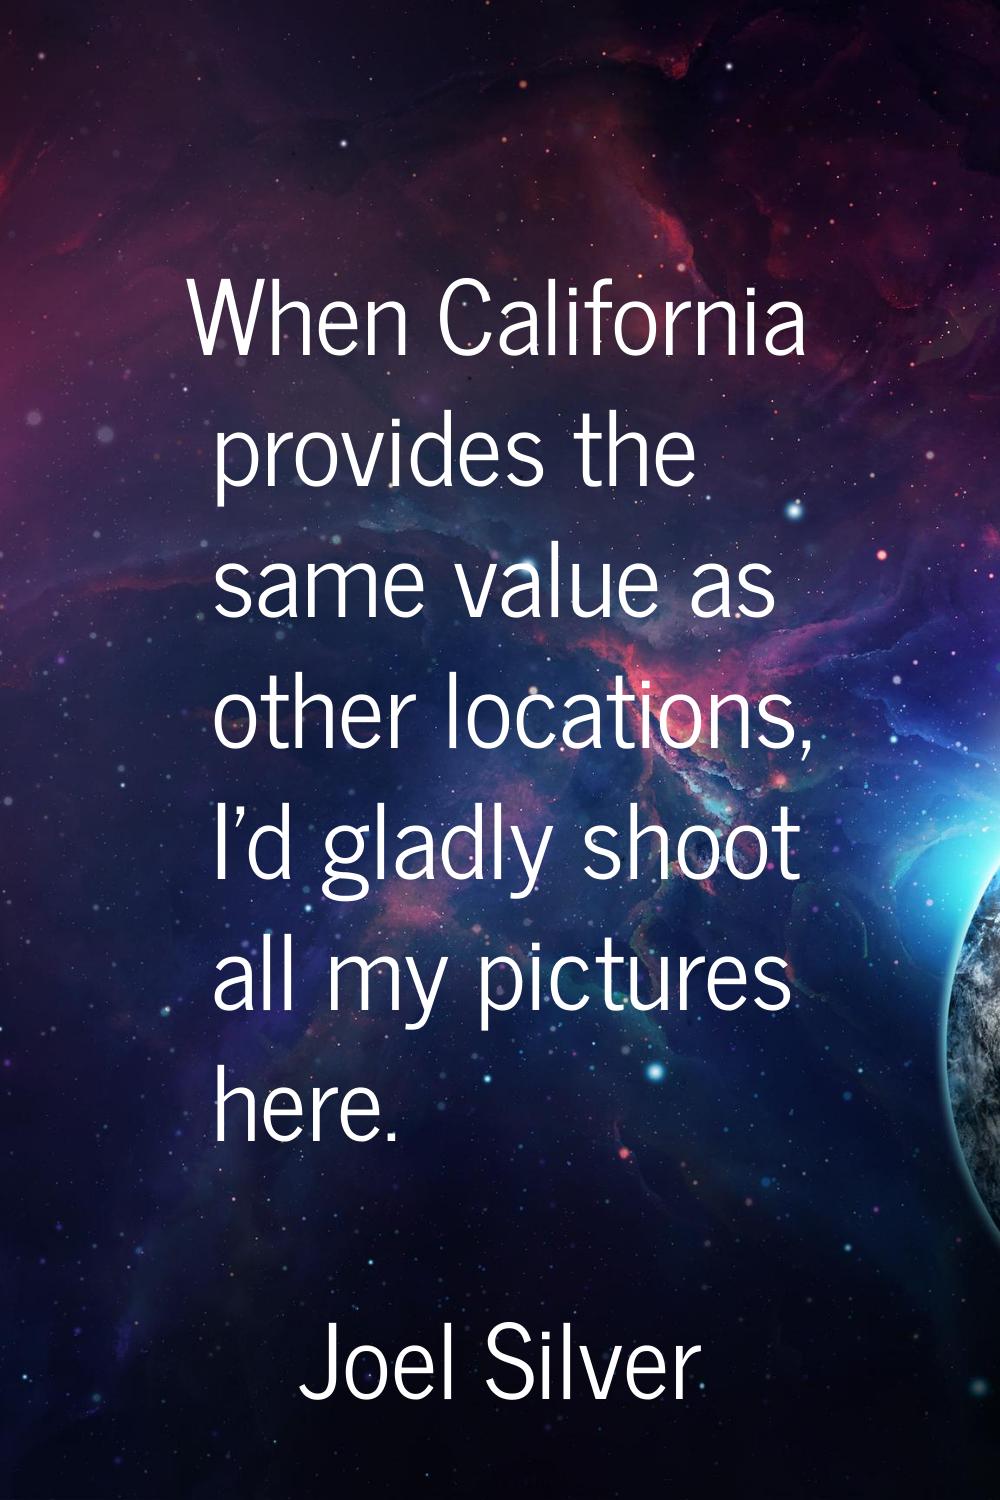 When California provides the same value as other locations, I'd gladly shoot all my pictures here.